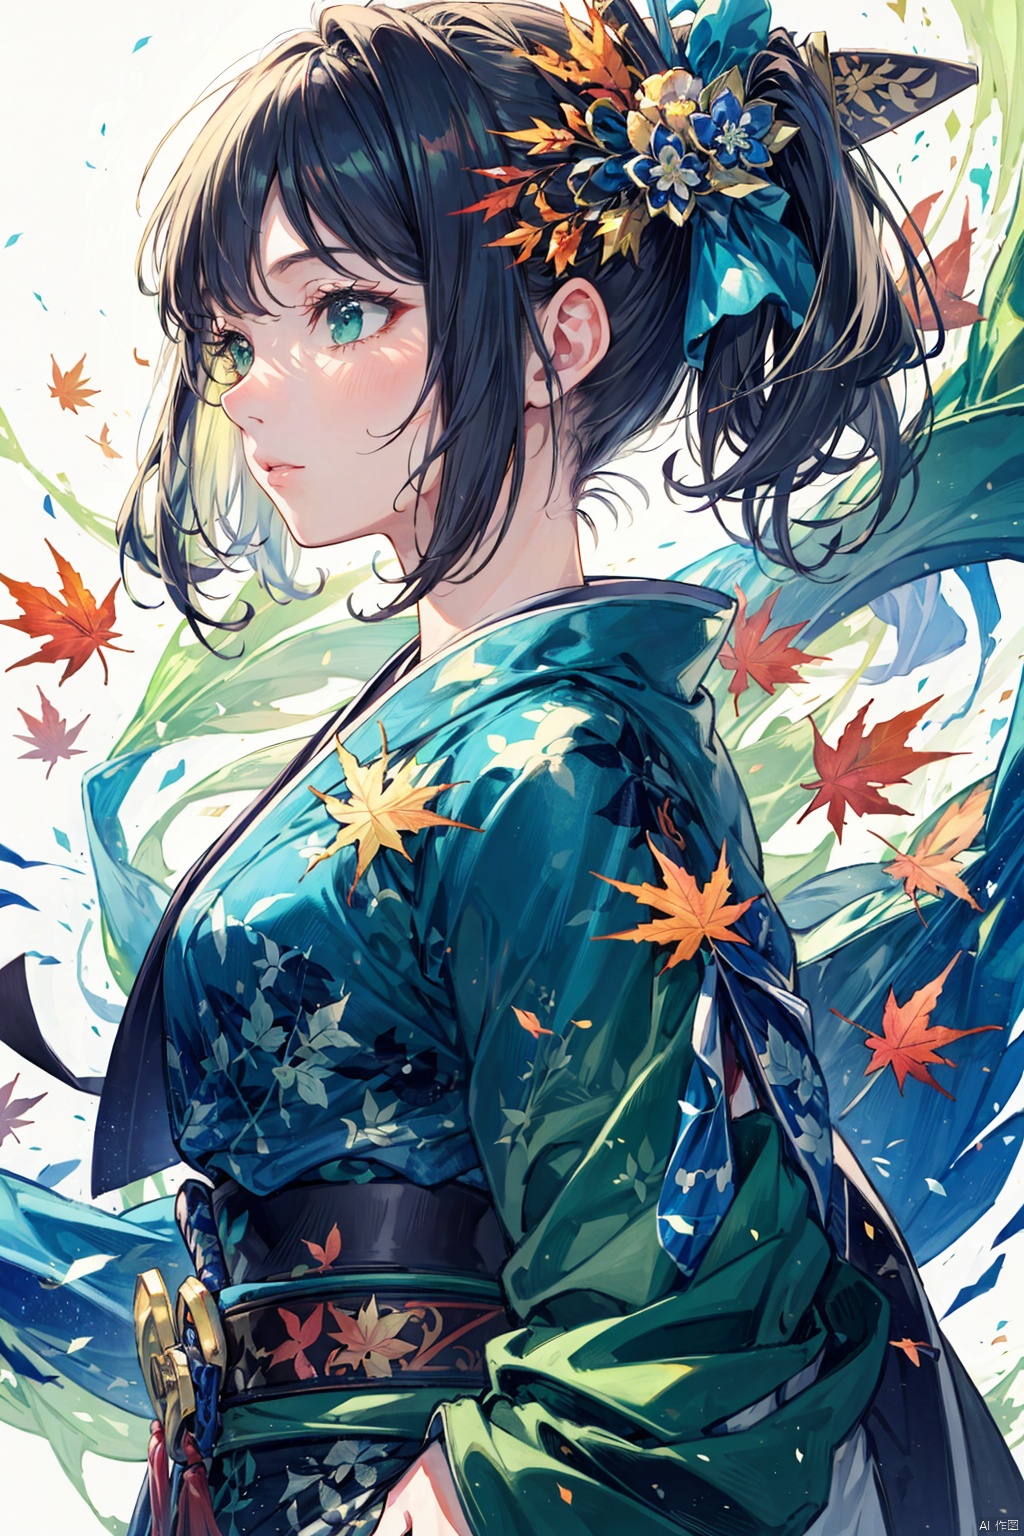 clean background,1 girl,28 years old,katana,wimd,maple leaf,blue and green ink,close shot,from front